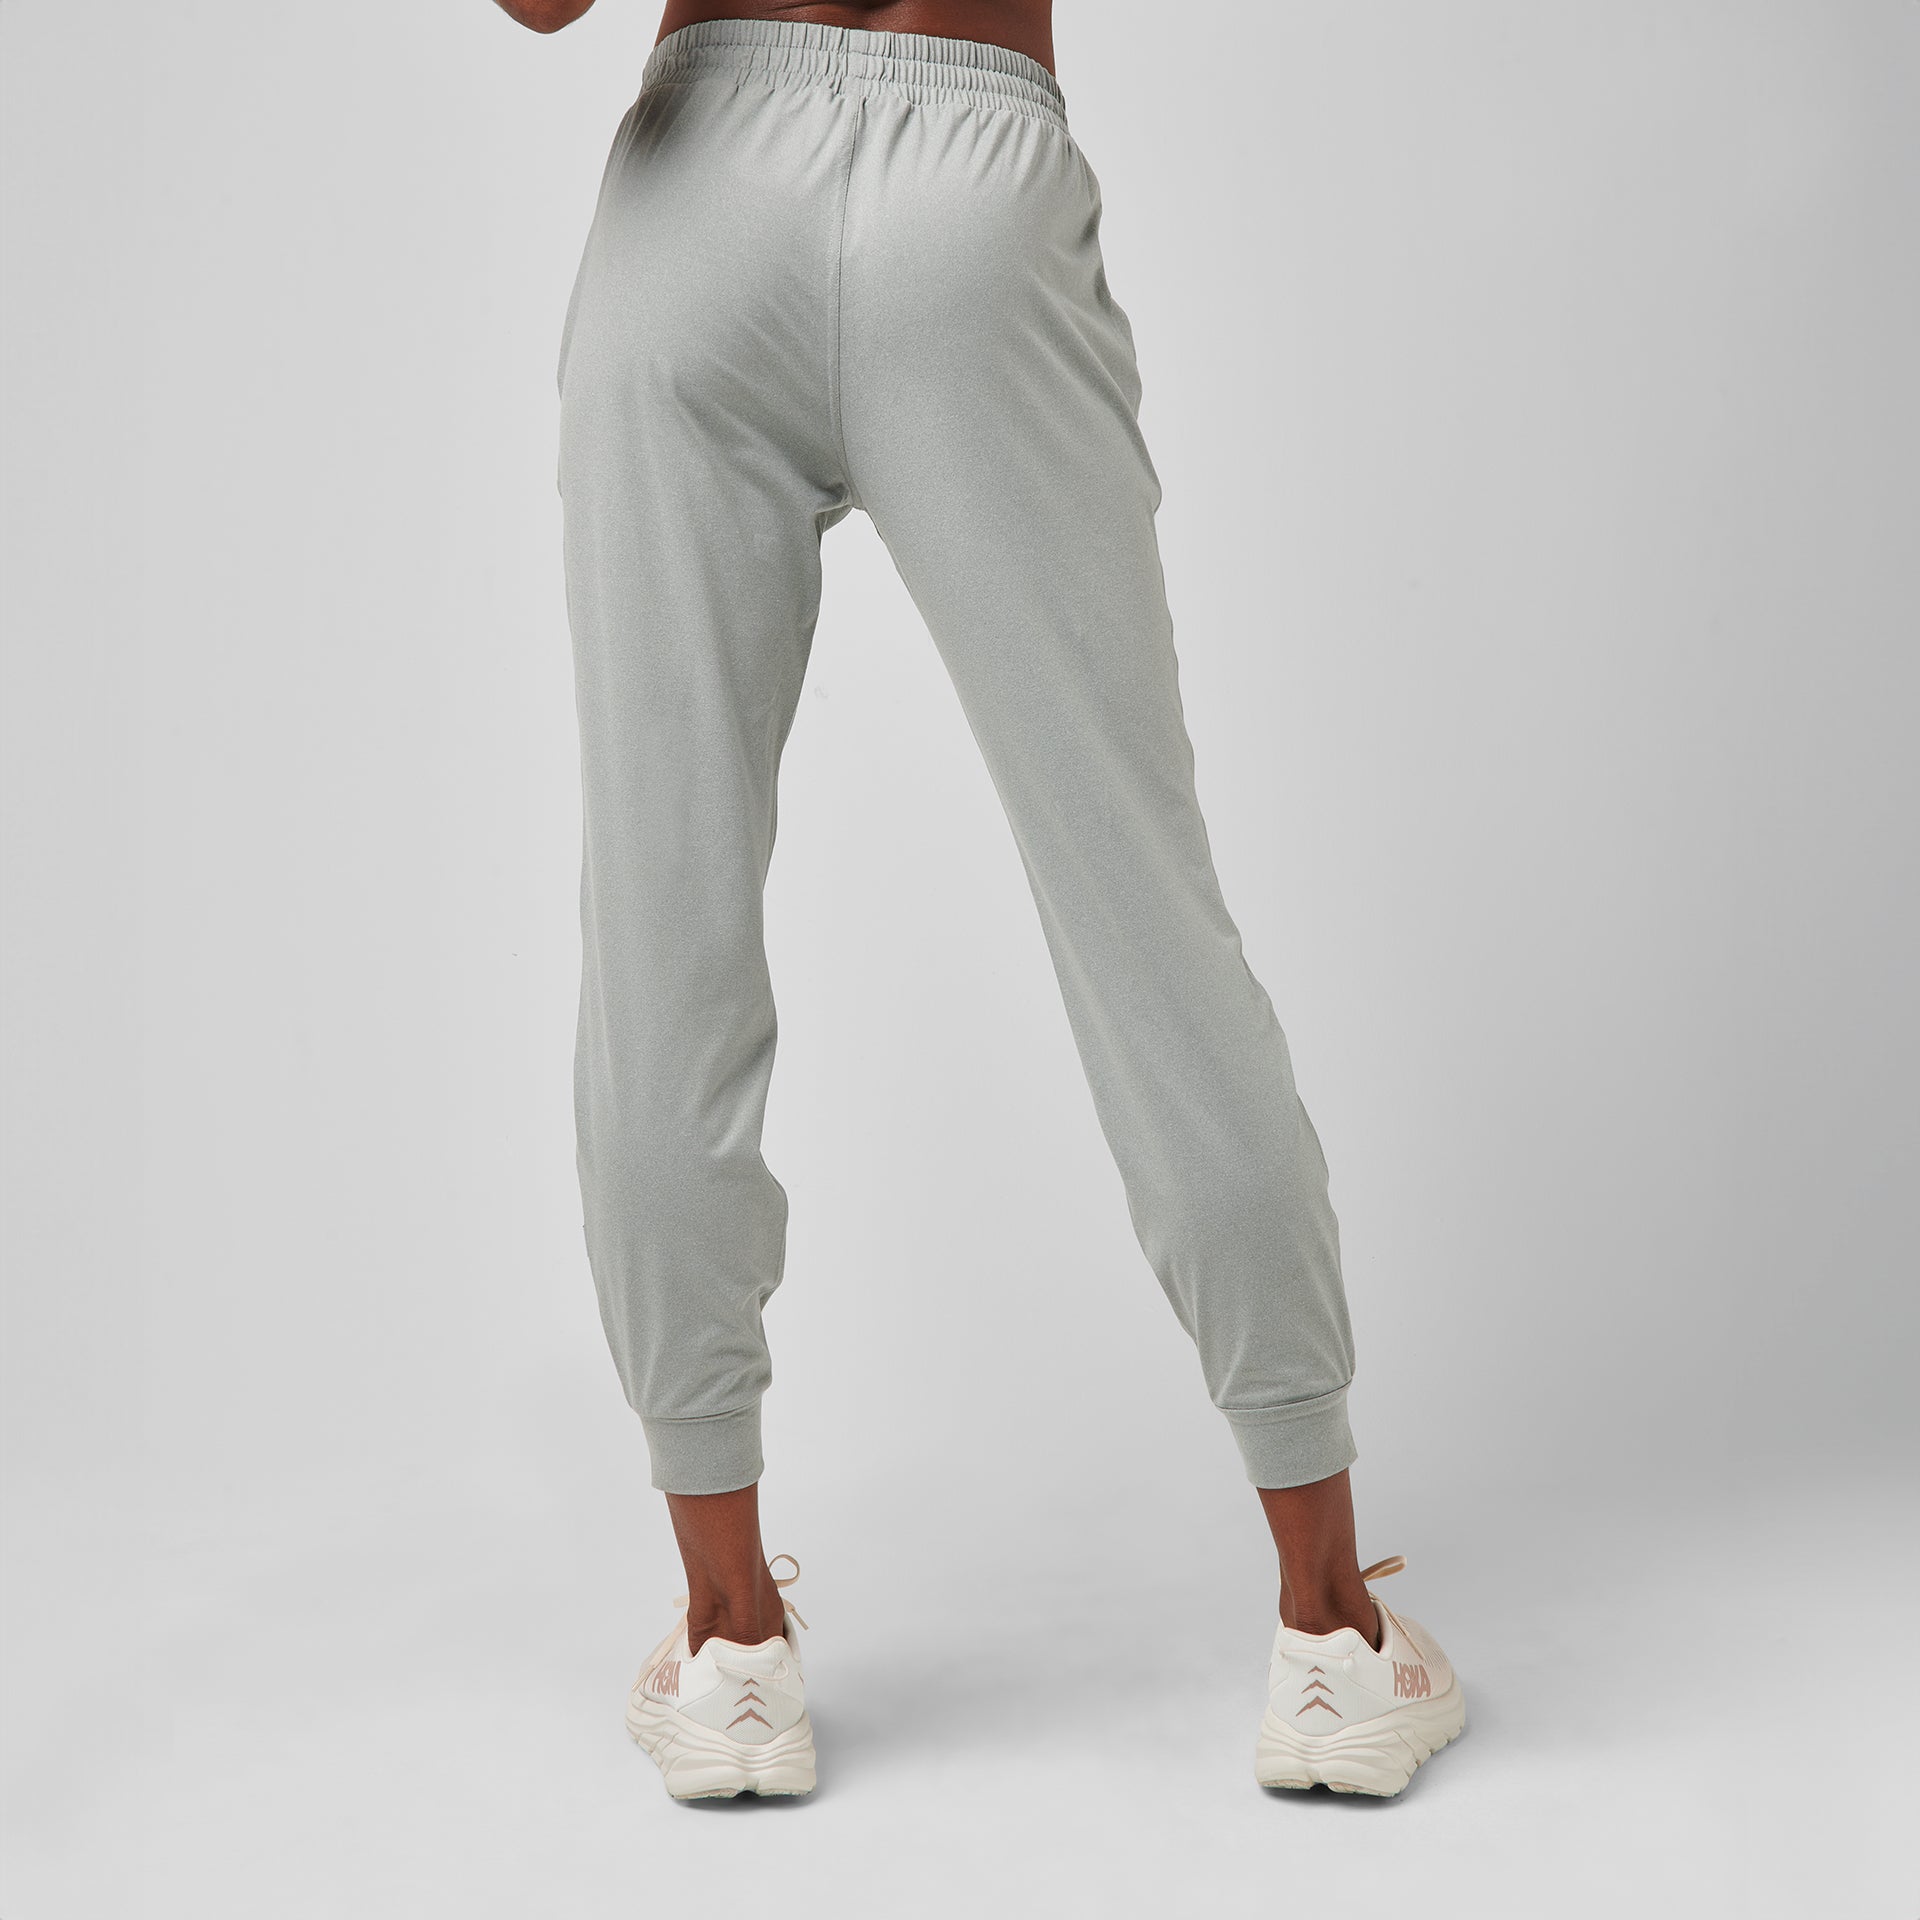 Cinch Bottom Sweatpants for Women with Pockets - China Sweatpants